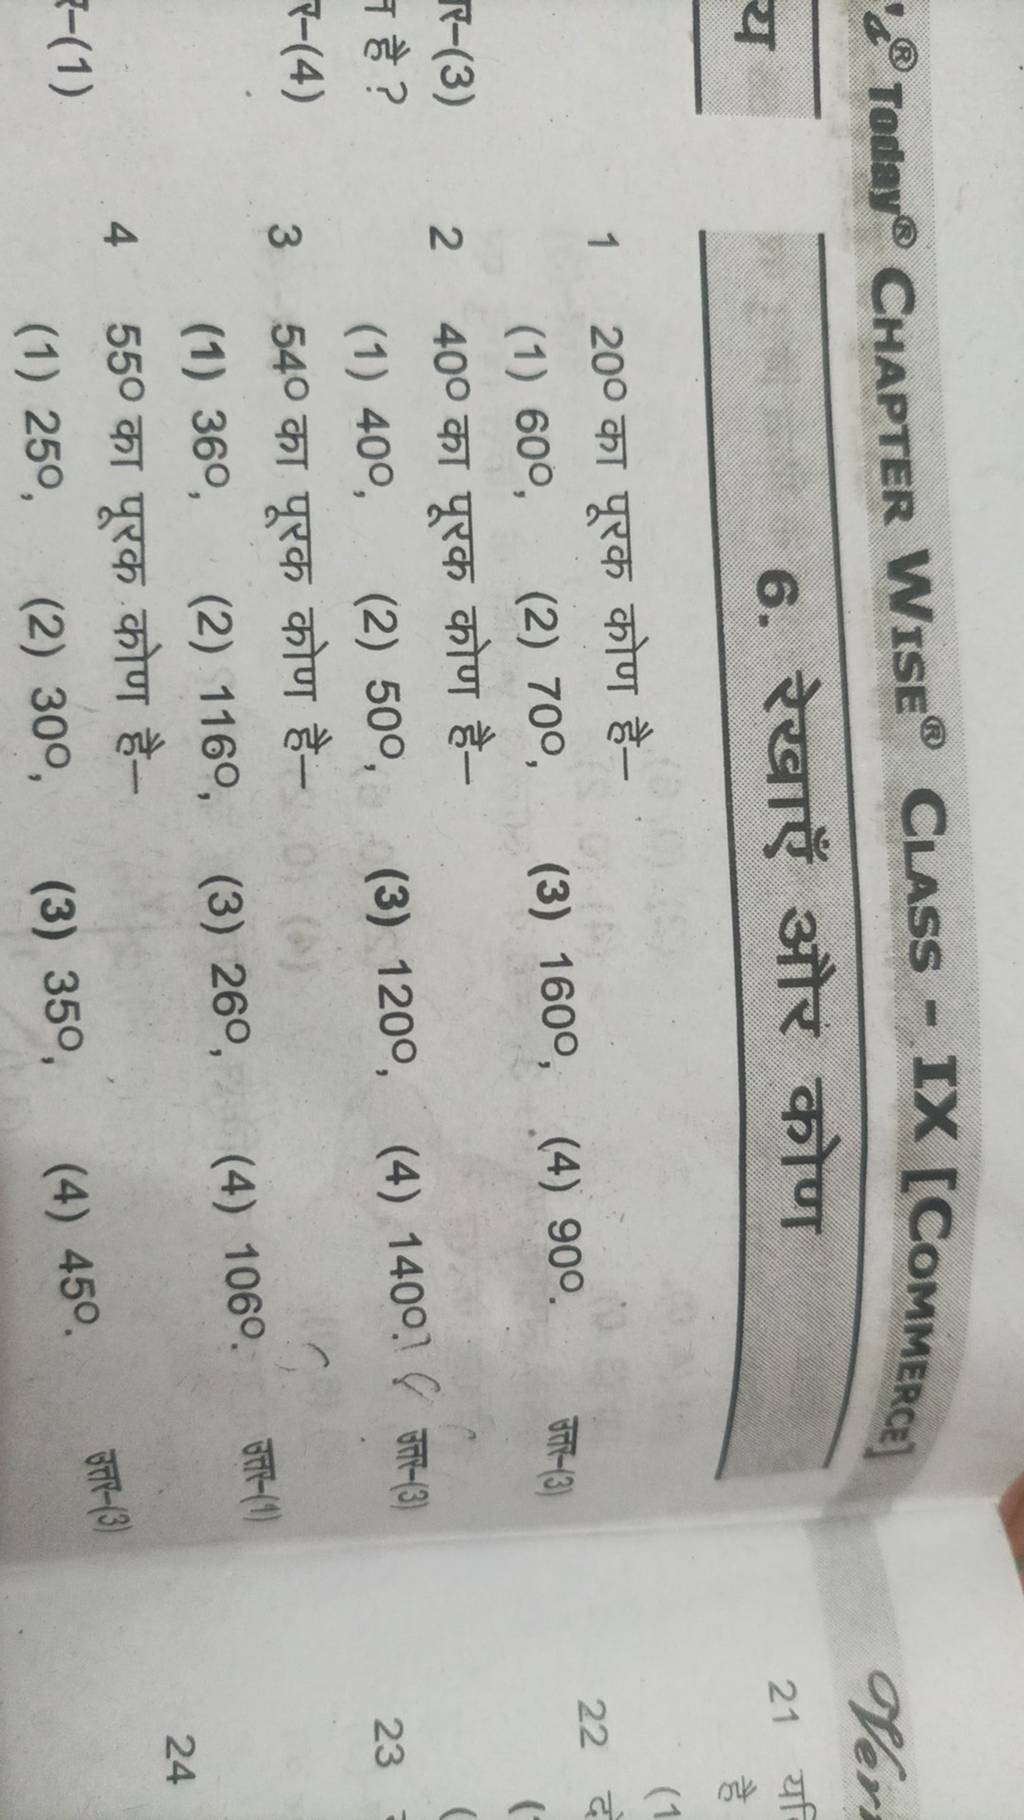 '\& ® today ® Chapter WISE ⊗ Class - IX [ComMERCE]
6. रेखाएँ और कोण
12